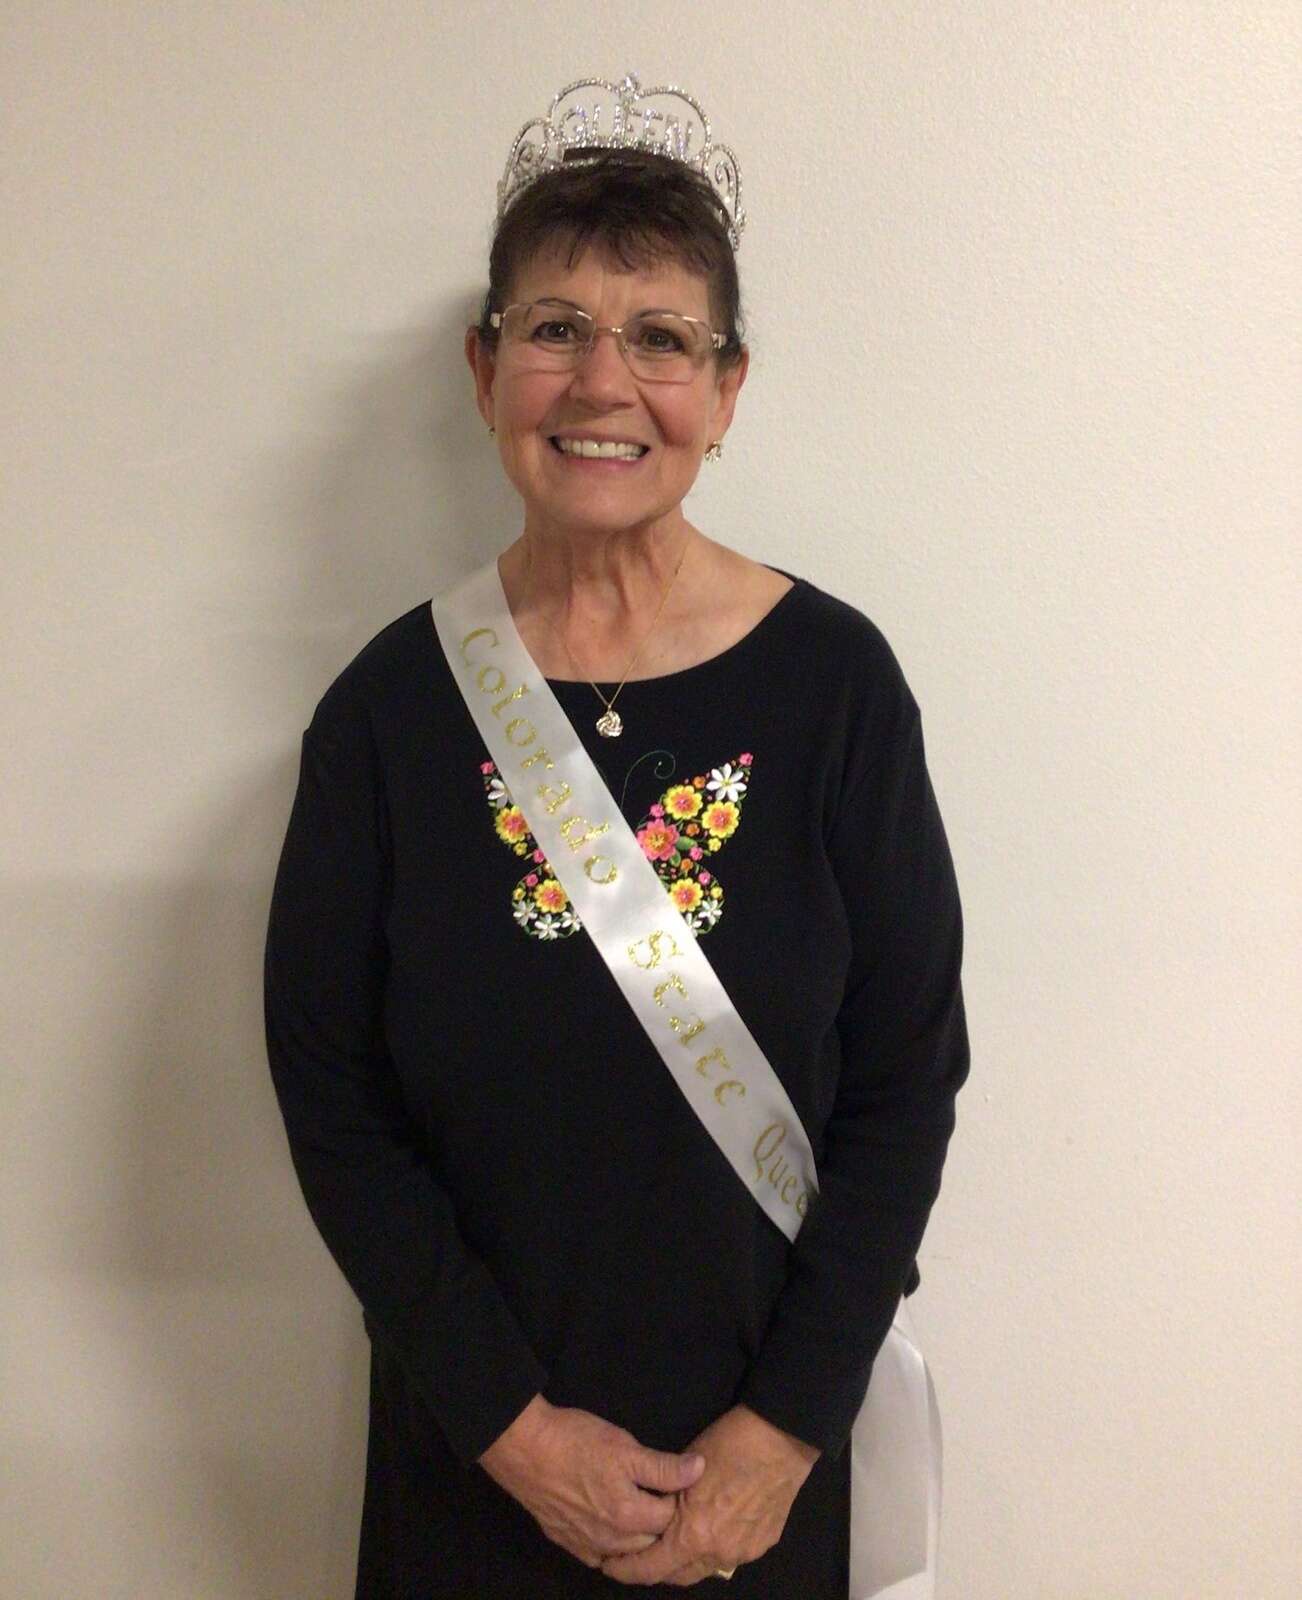 Cortez woman named Colorado queen of weight-loss organization - The Journal